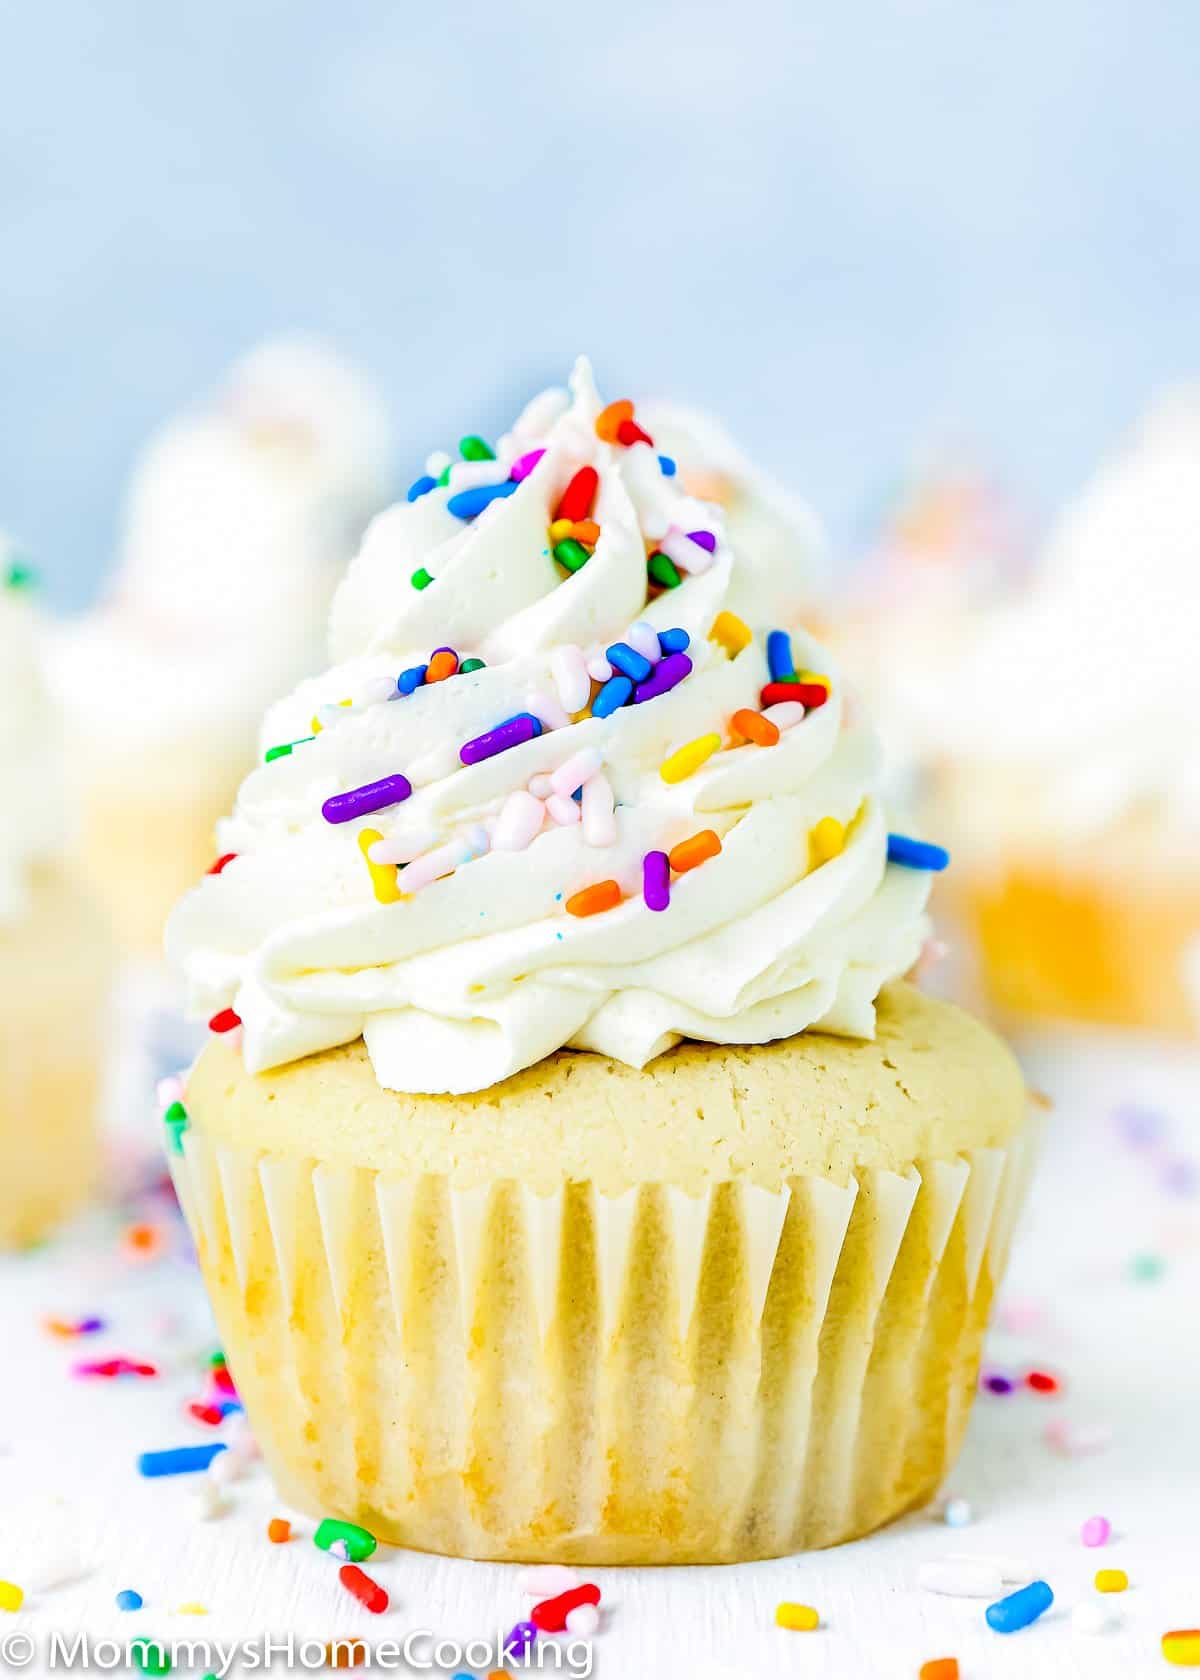 A fluffy and moist vanilla cupcake made without eggs with frosting and sprinkles on top.